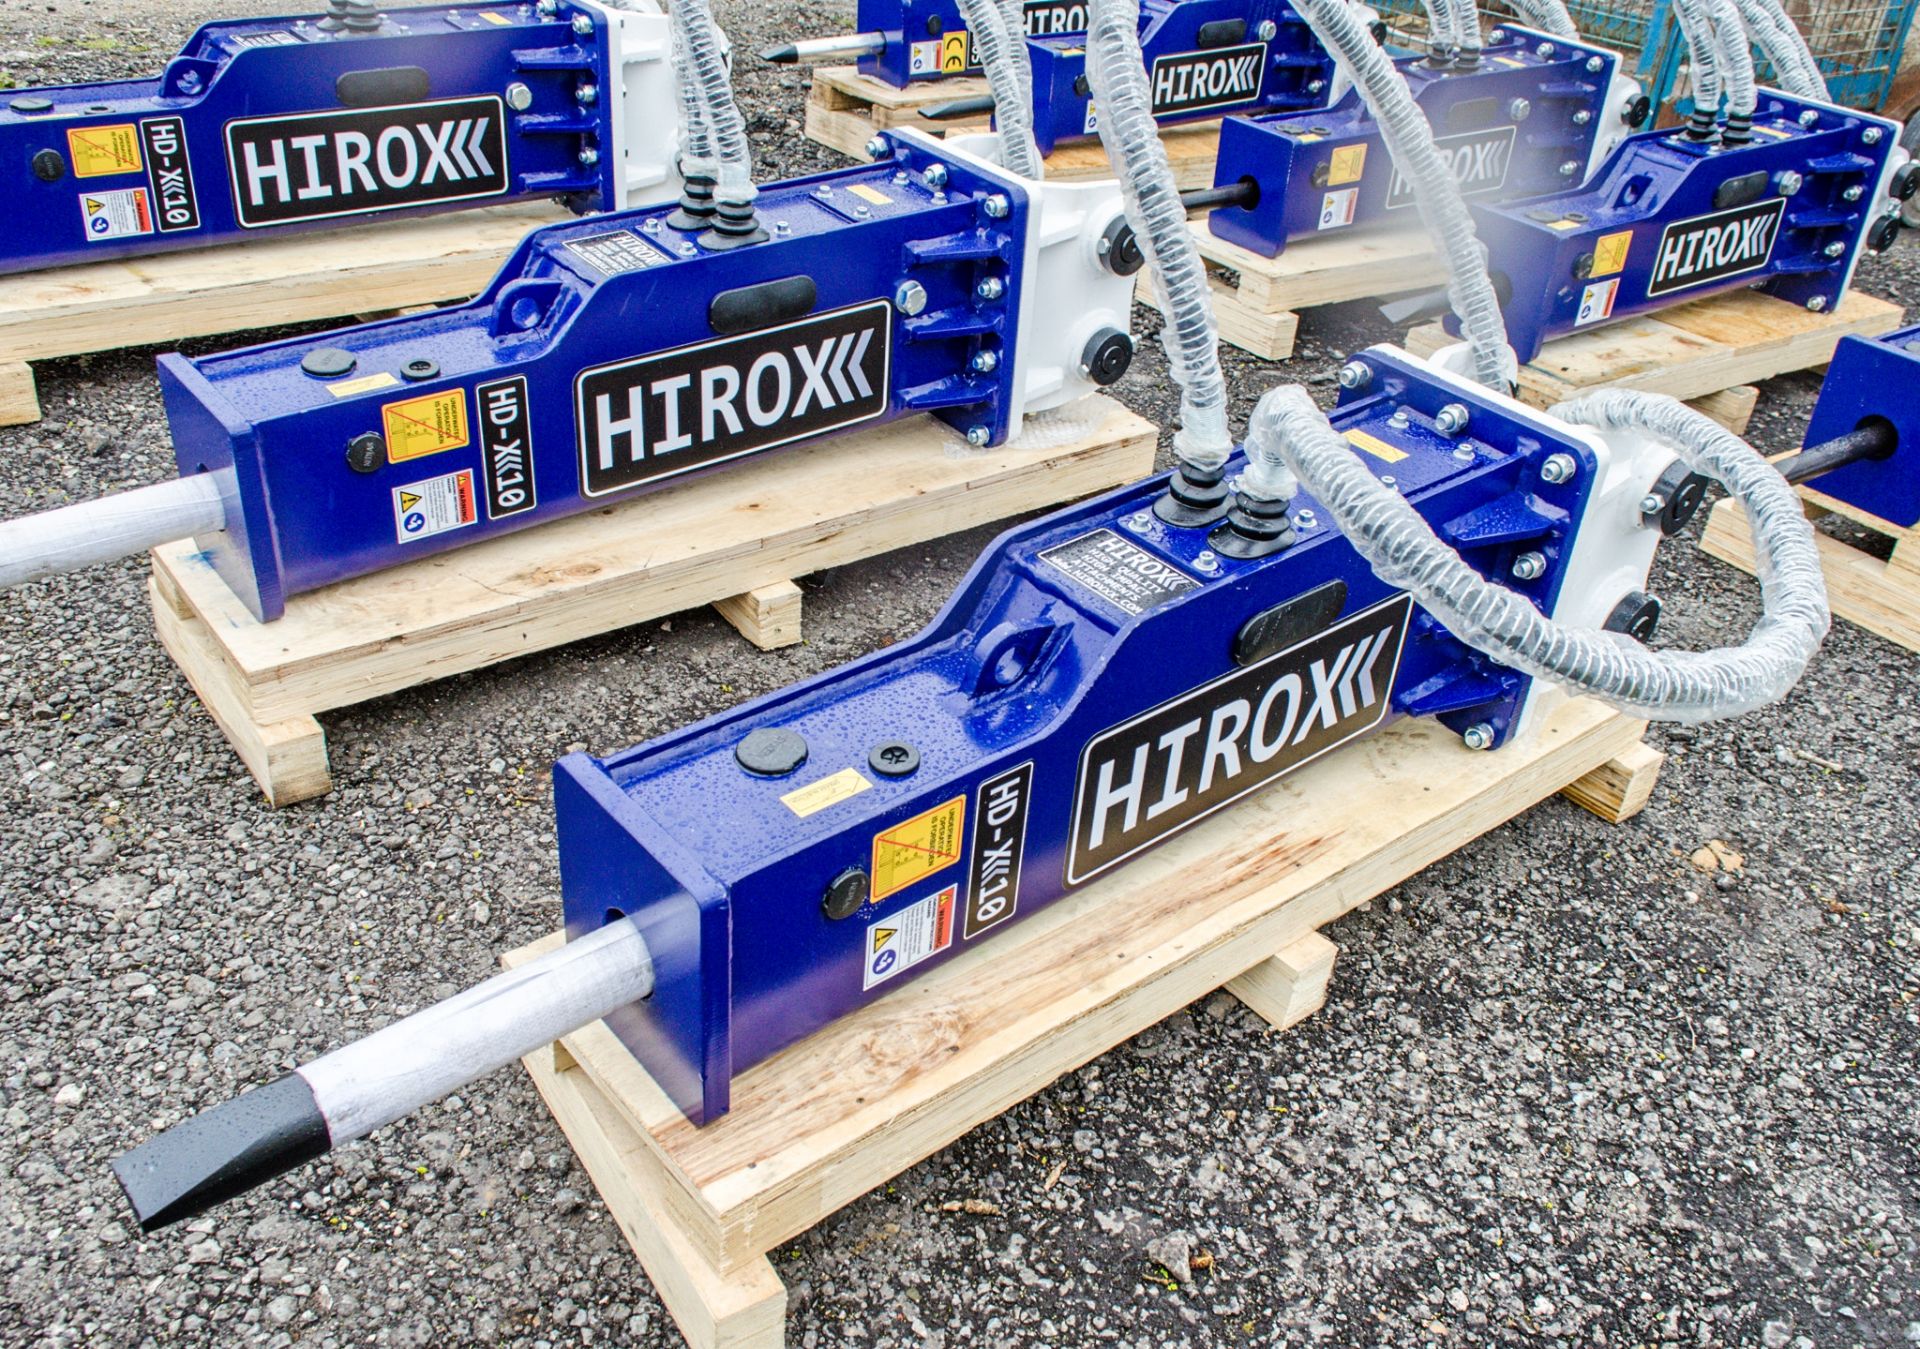 Hirox HDX-10 hydraulic breaker to suit 1.5 to 4 tonne machine Year: 2021 c/w tool kit ** New & - Image 2 of 4